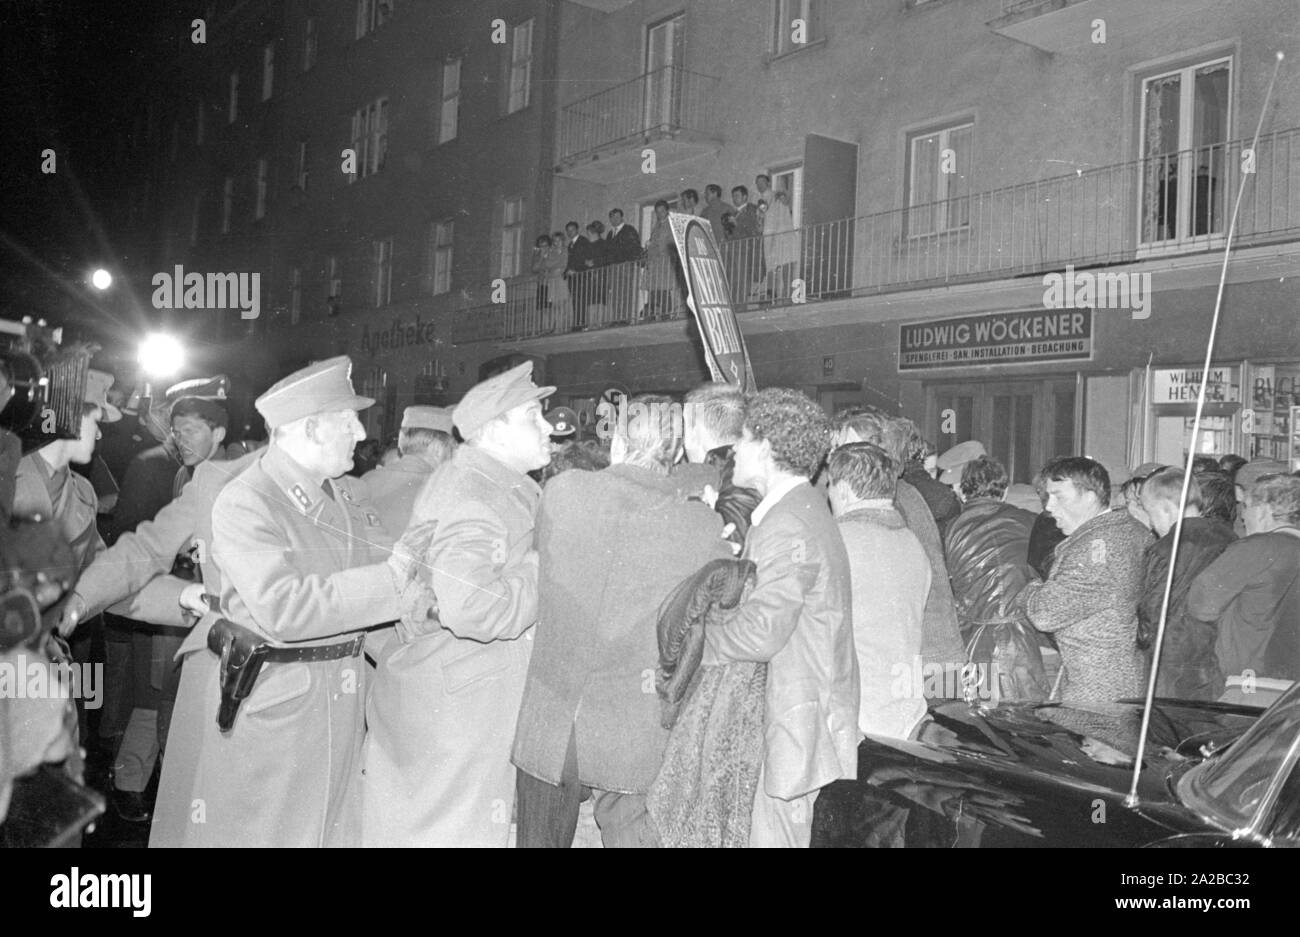 After the assassination attempt on Rudi Dutschke, actions took place against the Springer publishing house throughout Germany on the Easter weekend 1968. In Munich, demonstrators try to stop the delivery of the Bild-Zeitung through the barricade of the Munich bookshop on Schellingstrasse (either 12.04 or 15.04.).    Pictured: Melee between protesters and the police. Stock Photo